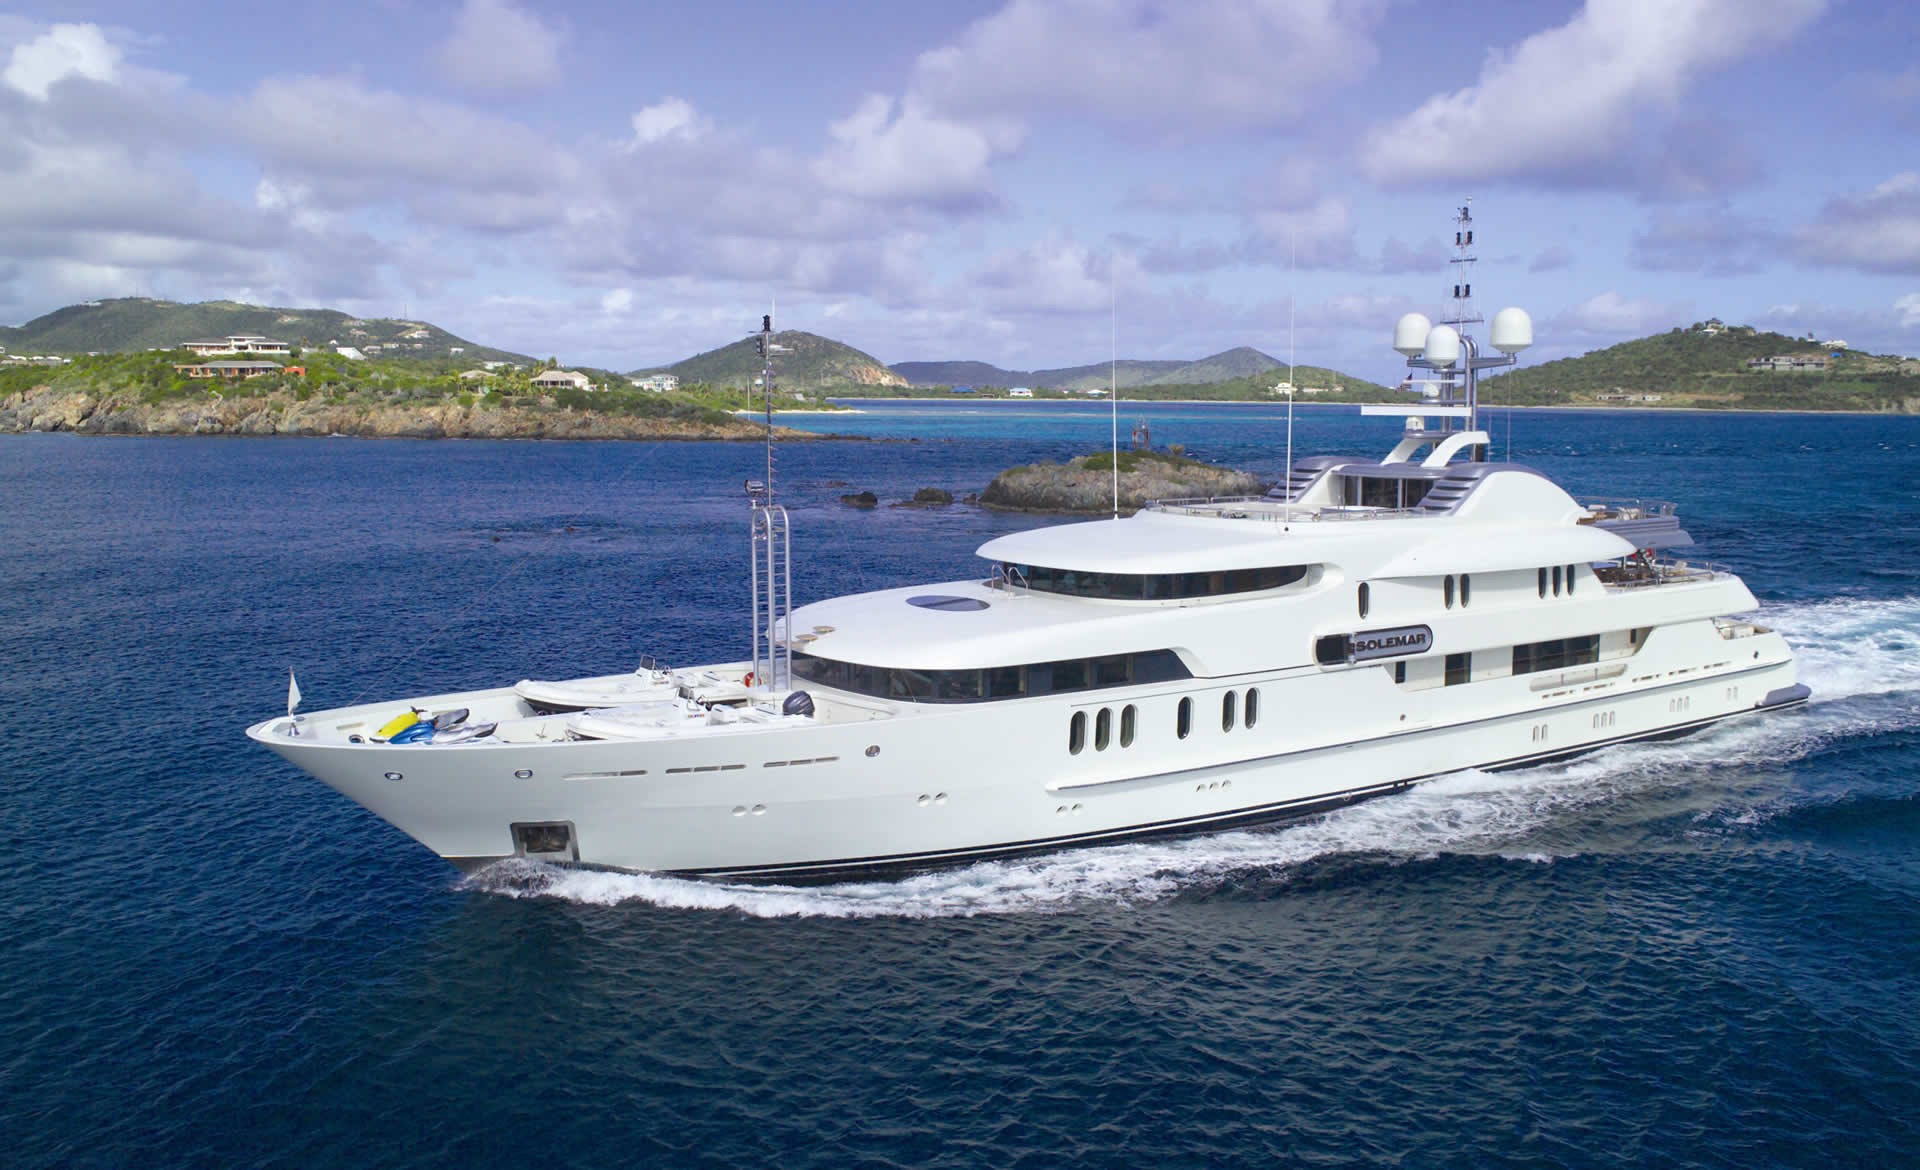 Premier Overview On Board Yacht CALYPSO